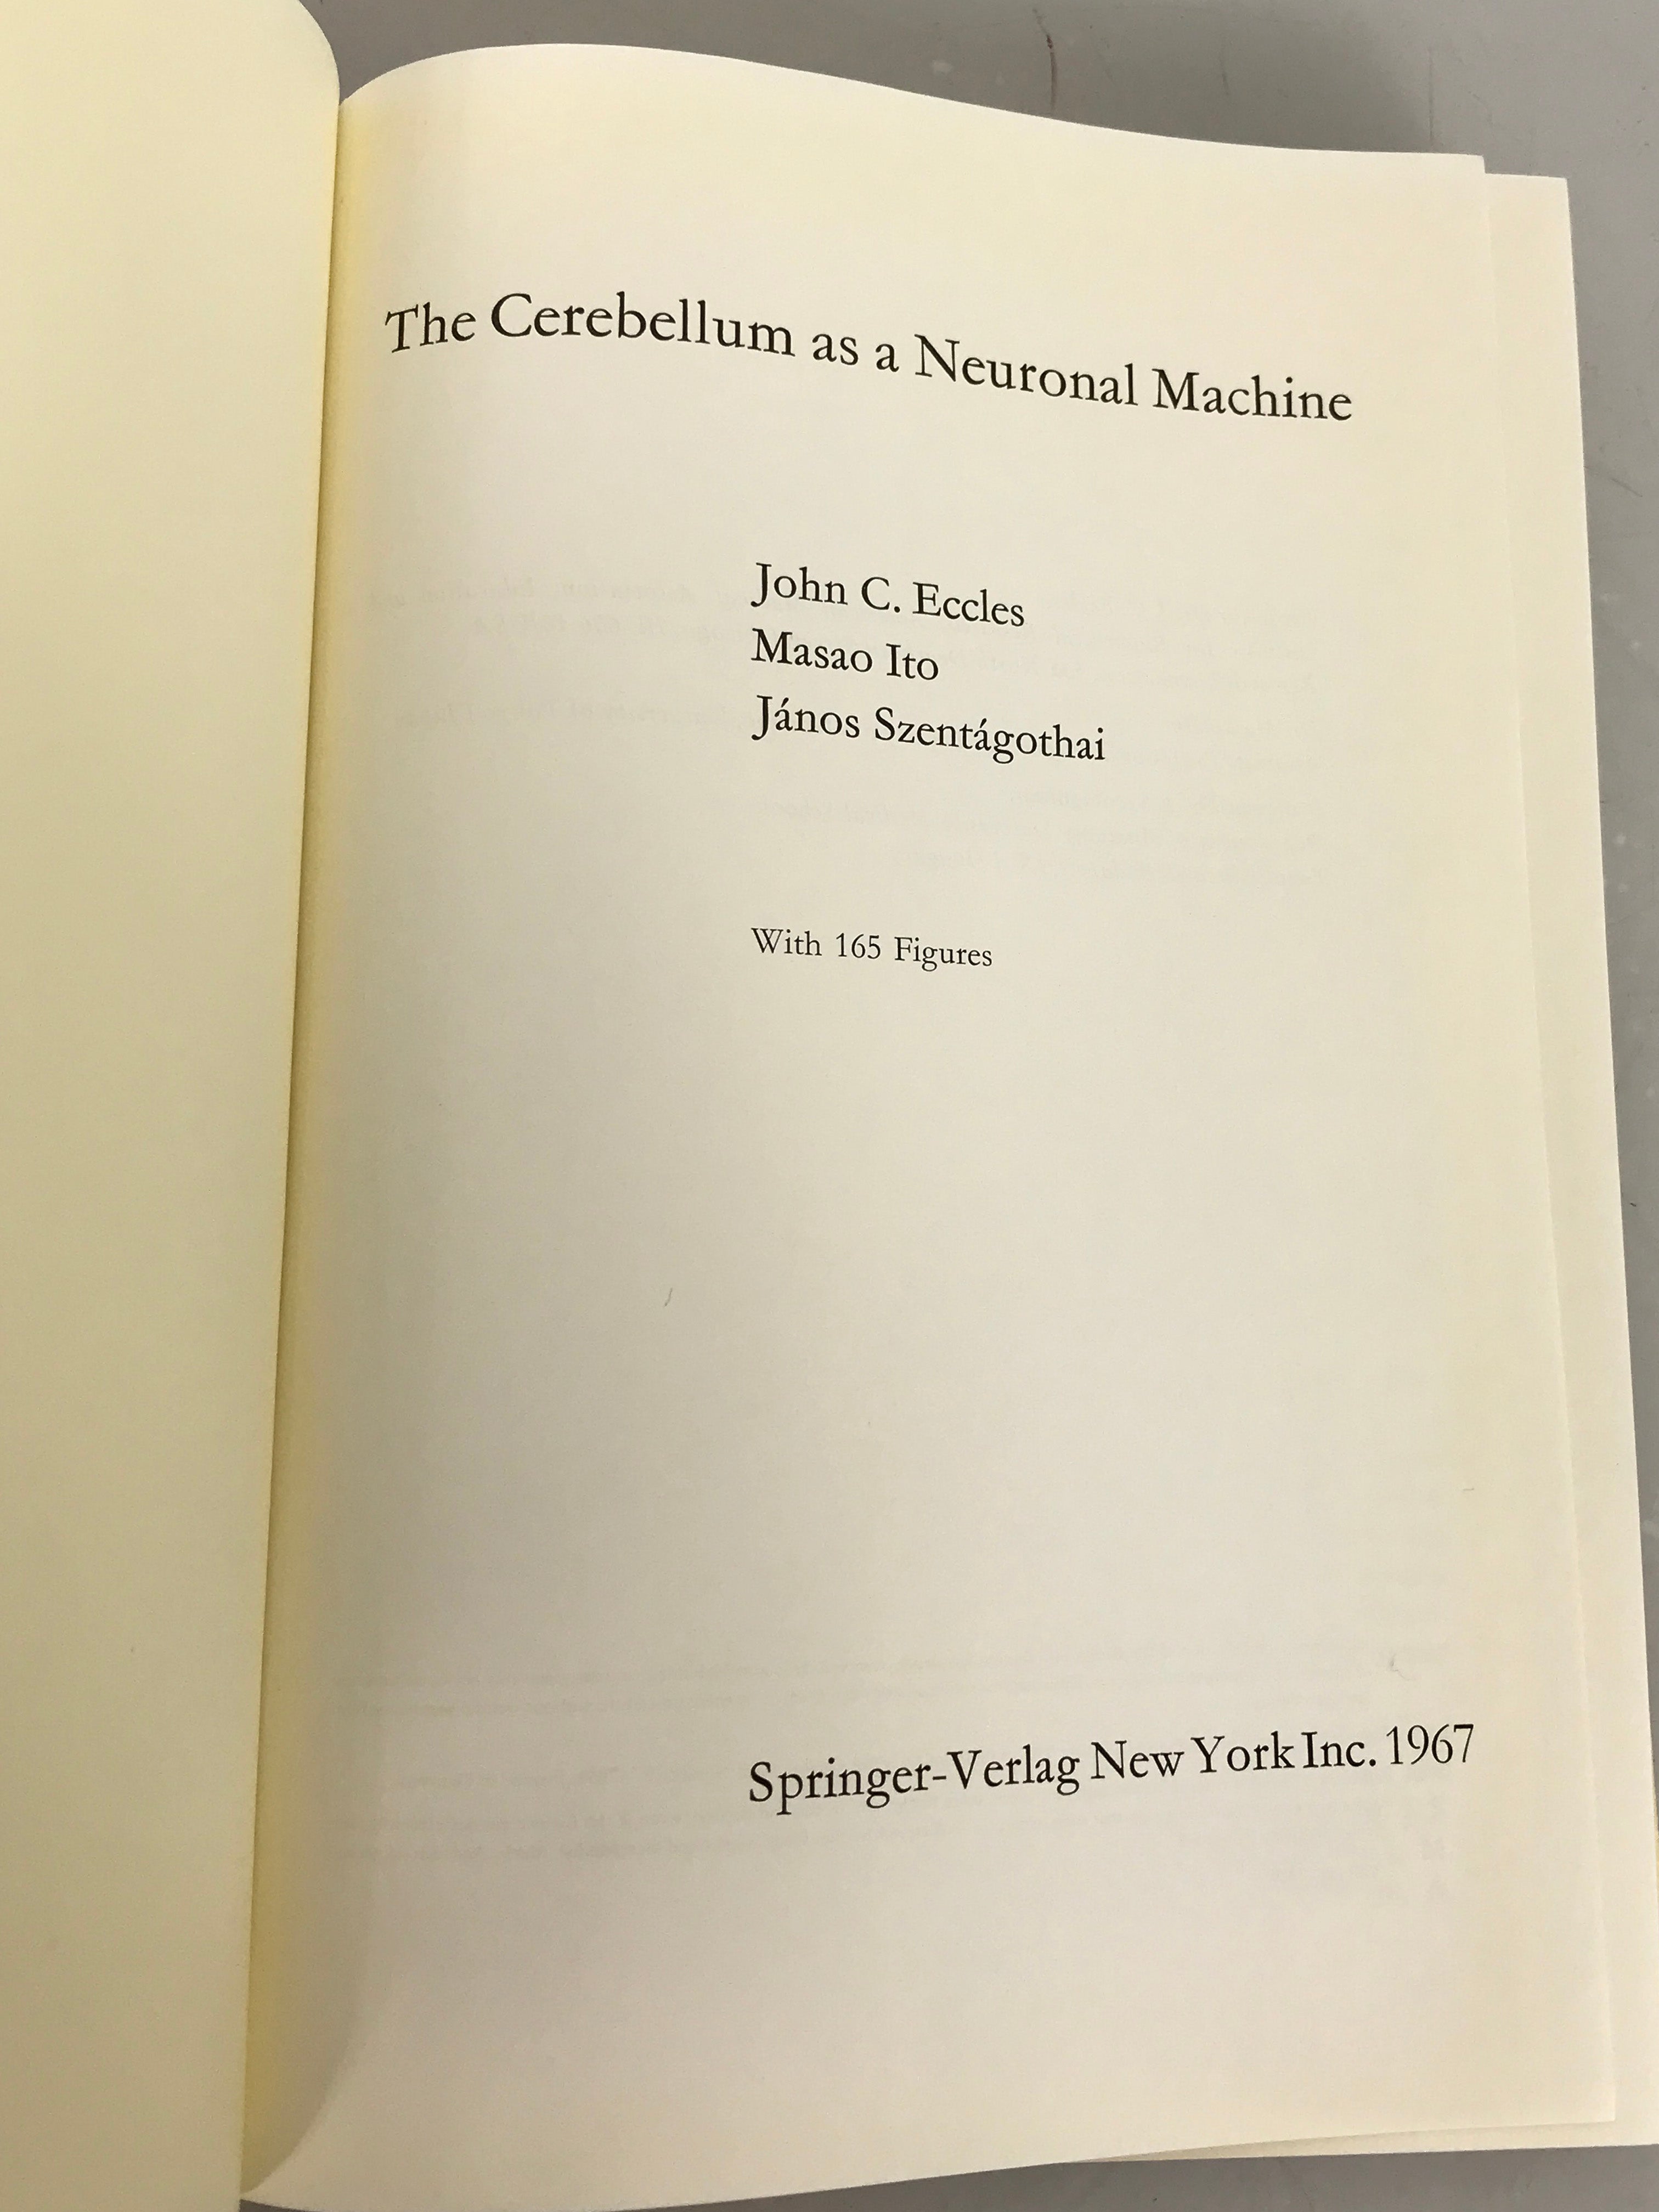 Lot of 2 Nobel Winner John C. Eccles Science Books: The Physiology of Nerve Cells (1960, signed) and The Cerebellum as a Neuronal Machine (1967, with Ito and Szentagothai) HC DJ